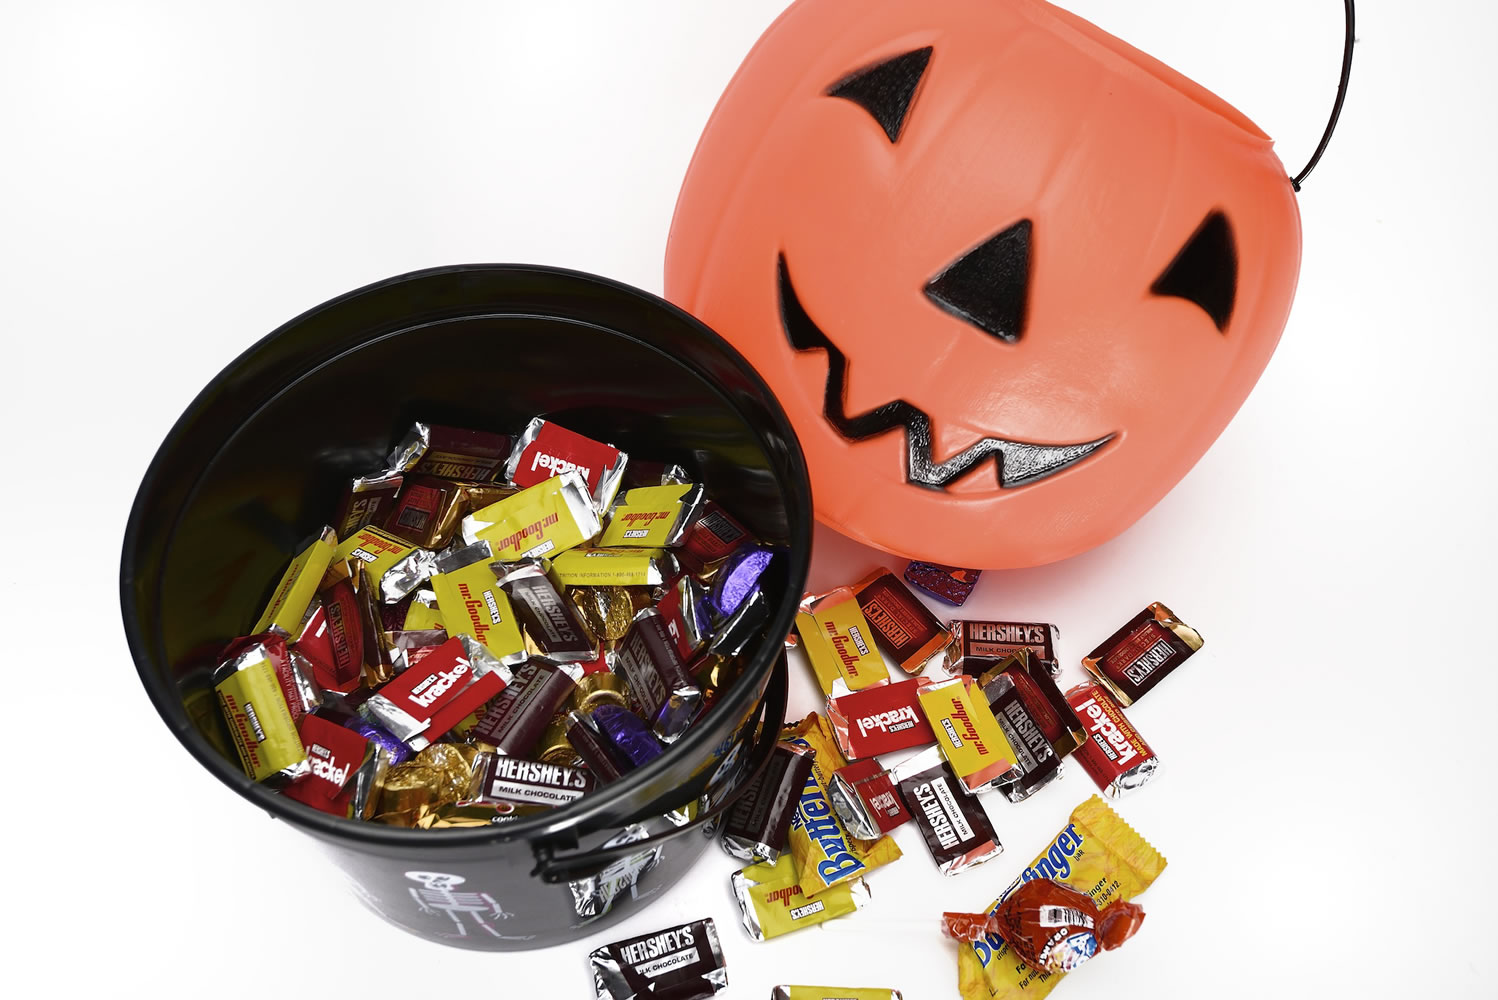 Kids may collect miniature candies while trick-or-treating, but local dietitians and pediatricians warn the calories in those smaller versions can quickly add up.